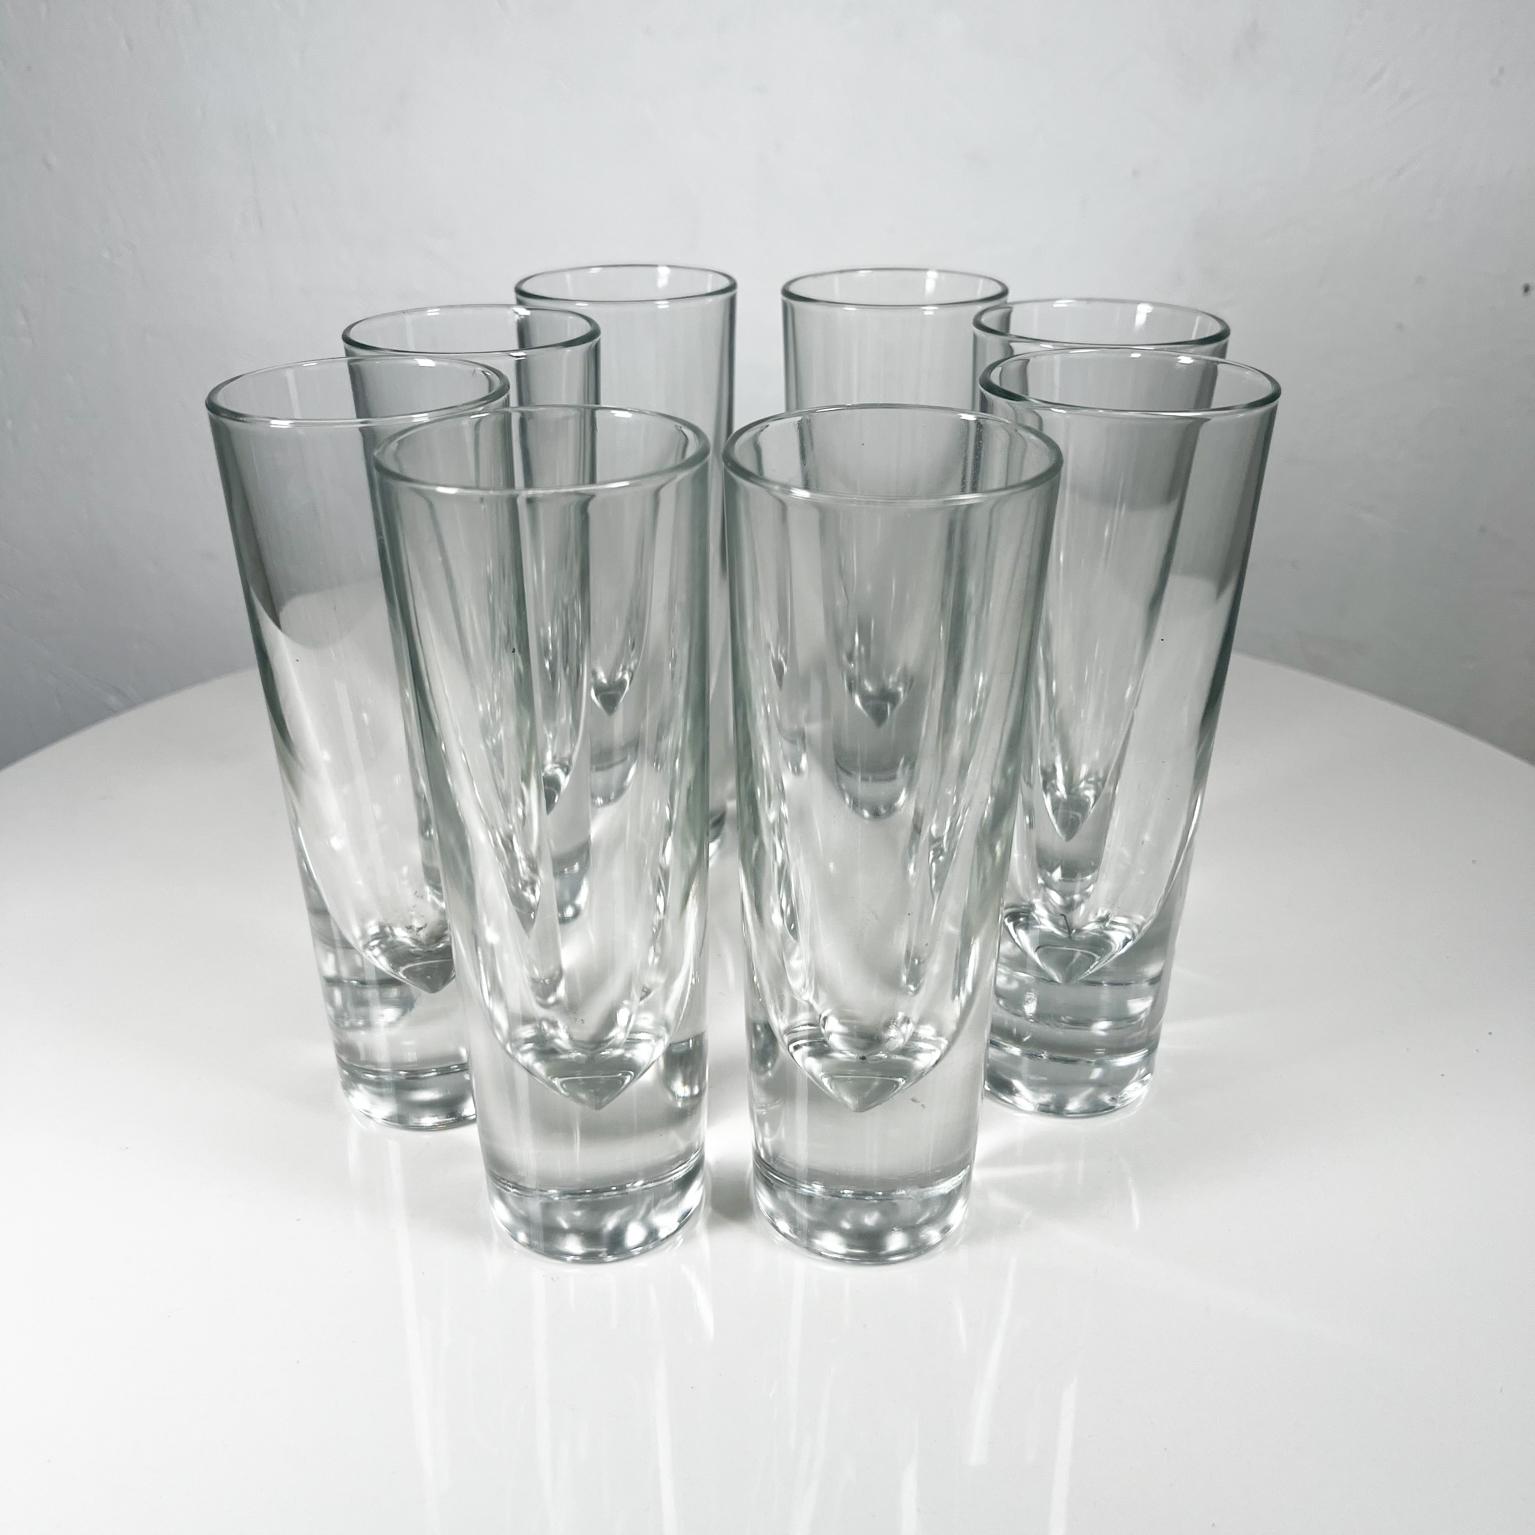 Presents

1980s Carlo Moretti Italian weighted cocktail glasses set of 8
Modern heavy blown glass Drinkware Gump style Italian bullet barware cocktail glasses
Stamped Italy
Measures: 6.88 tall x 2.38 diameter
Original vintage condition, refer